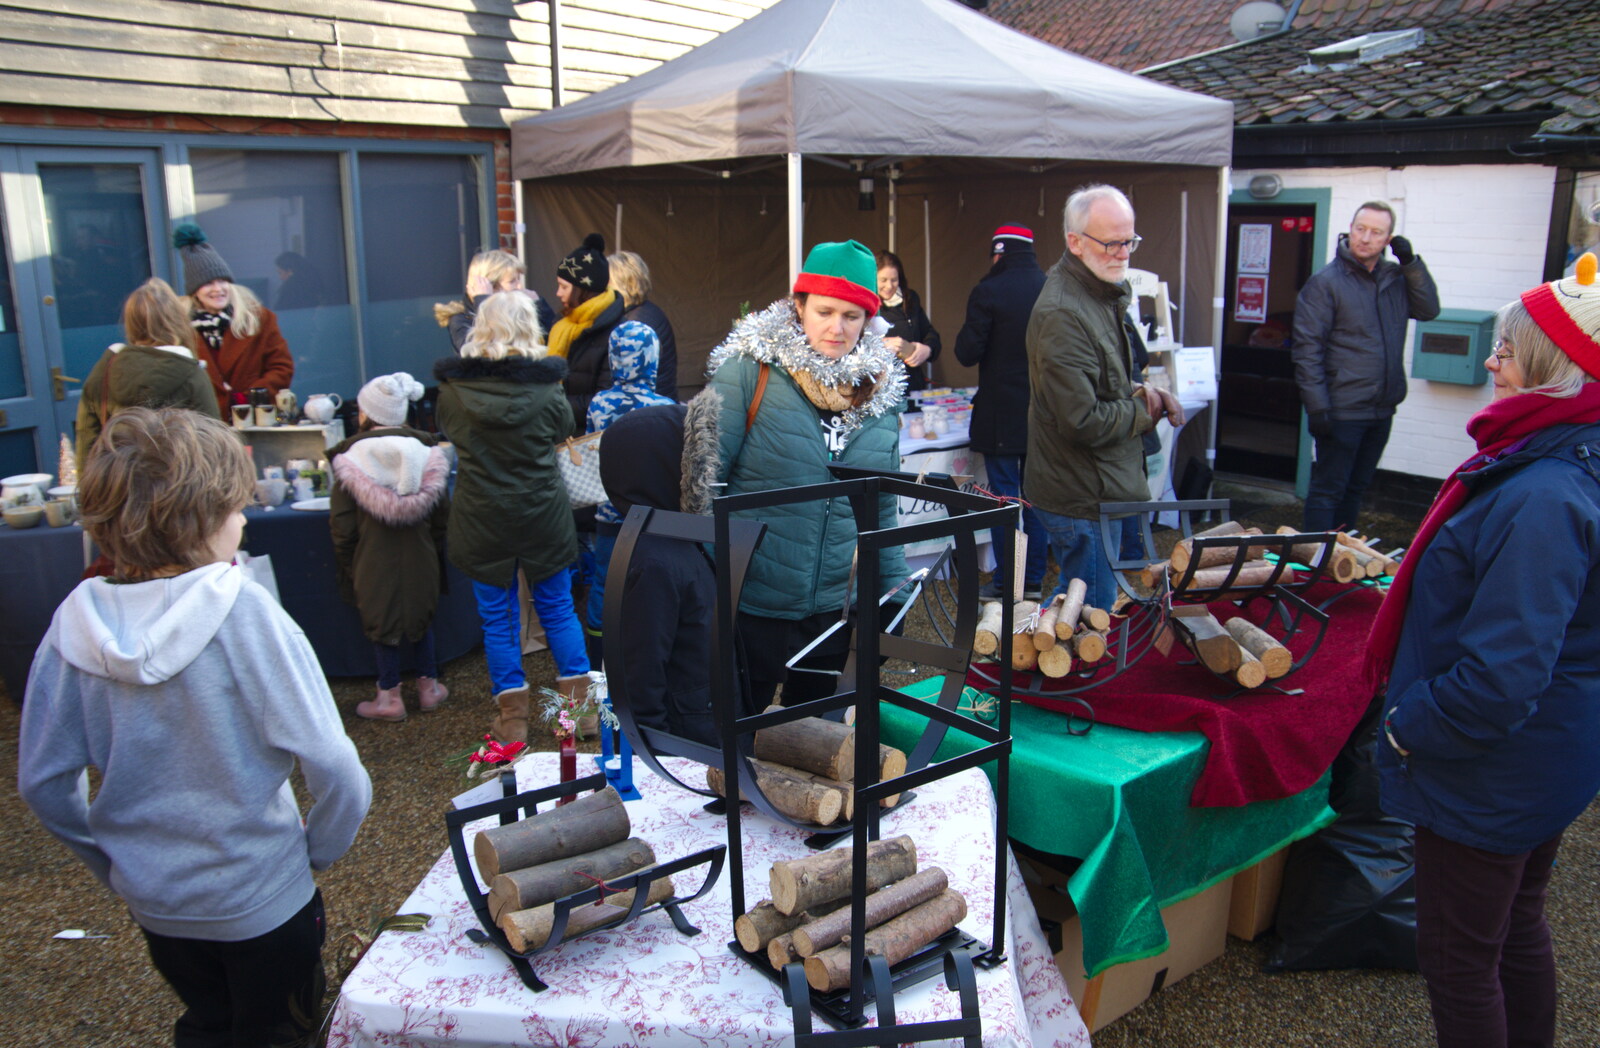 Isobel peruses log holders from The St. Nicholas Street Winter Fayre, Diss, Norfolk - 14th December 2019